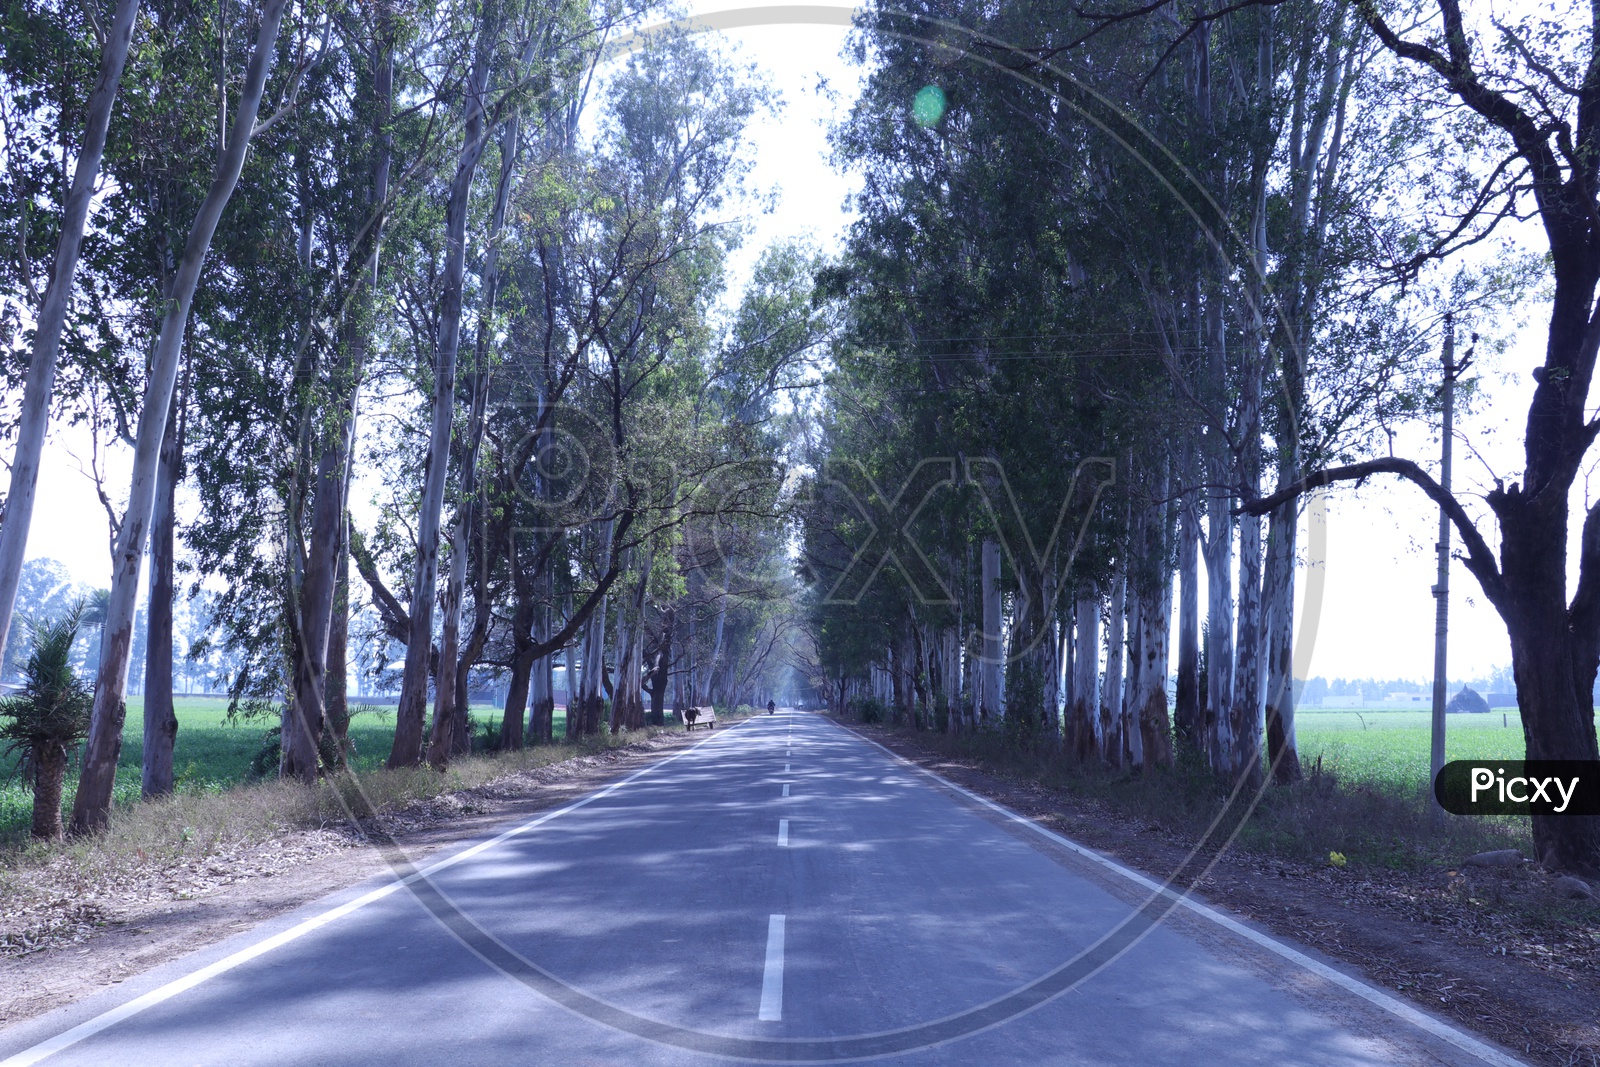 Road with eucalyptus trees on either side